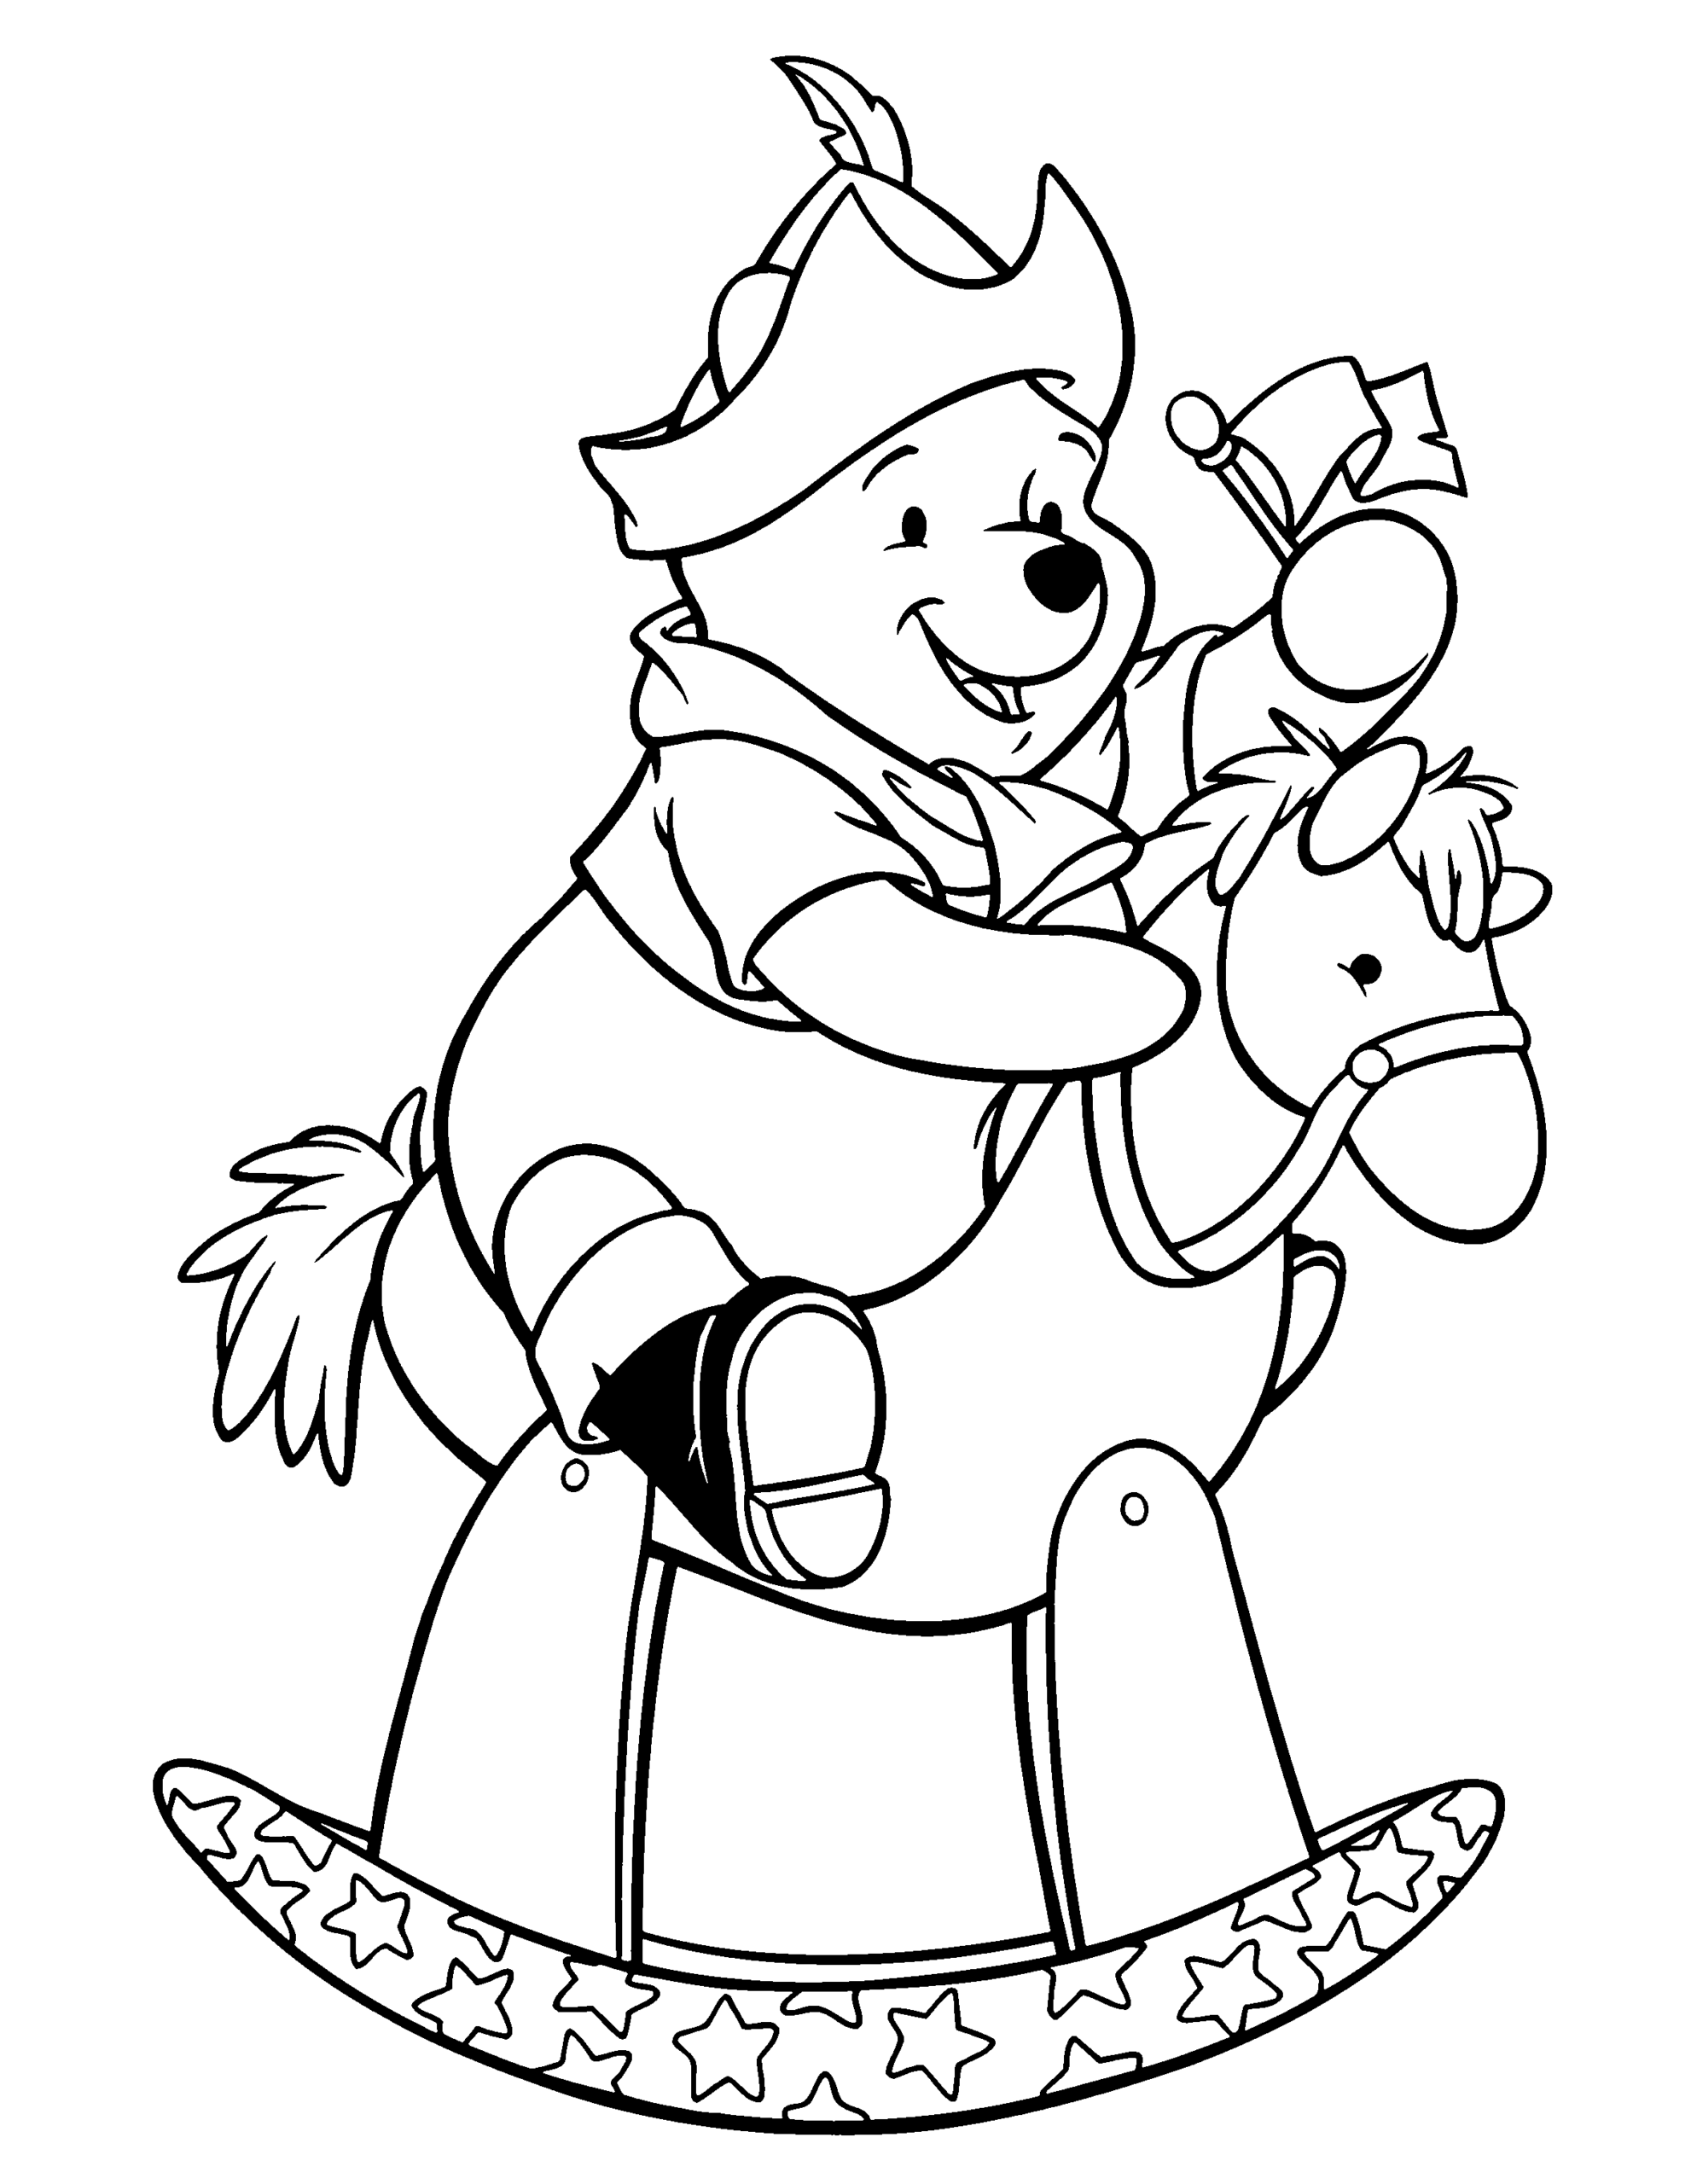 Winnie the Pooh Coloring Pages Cartoons winnie the pooh 91 Printable 2020 7214 Coloring4free